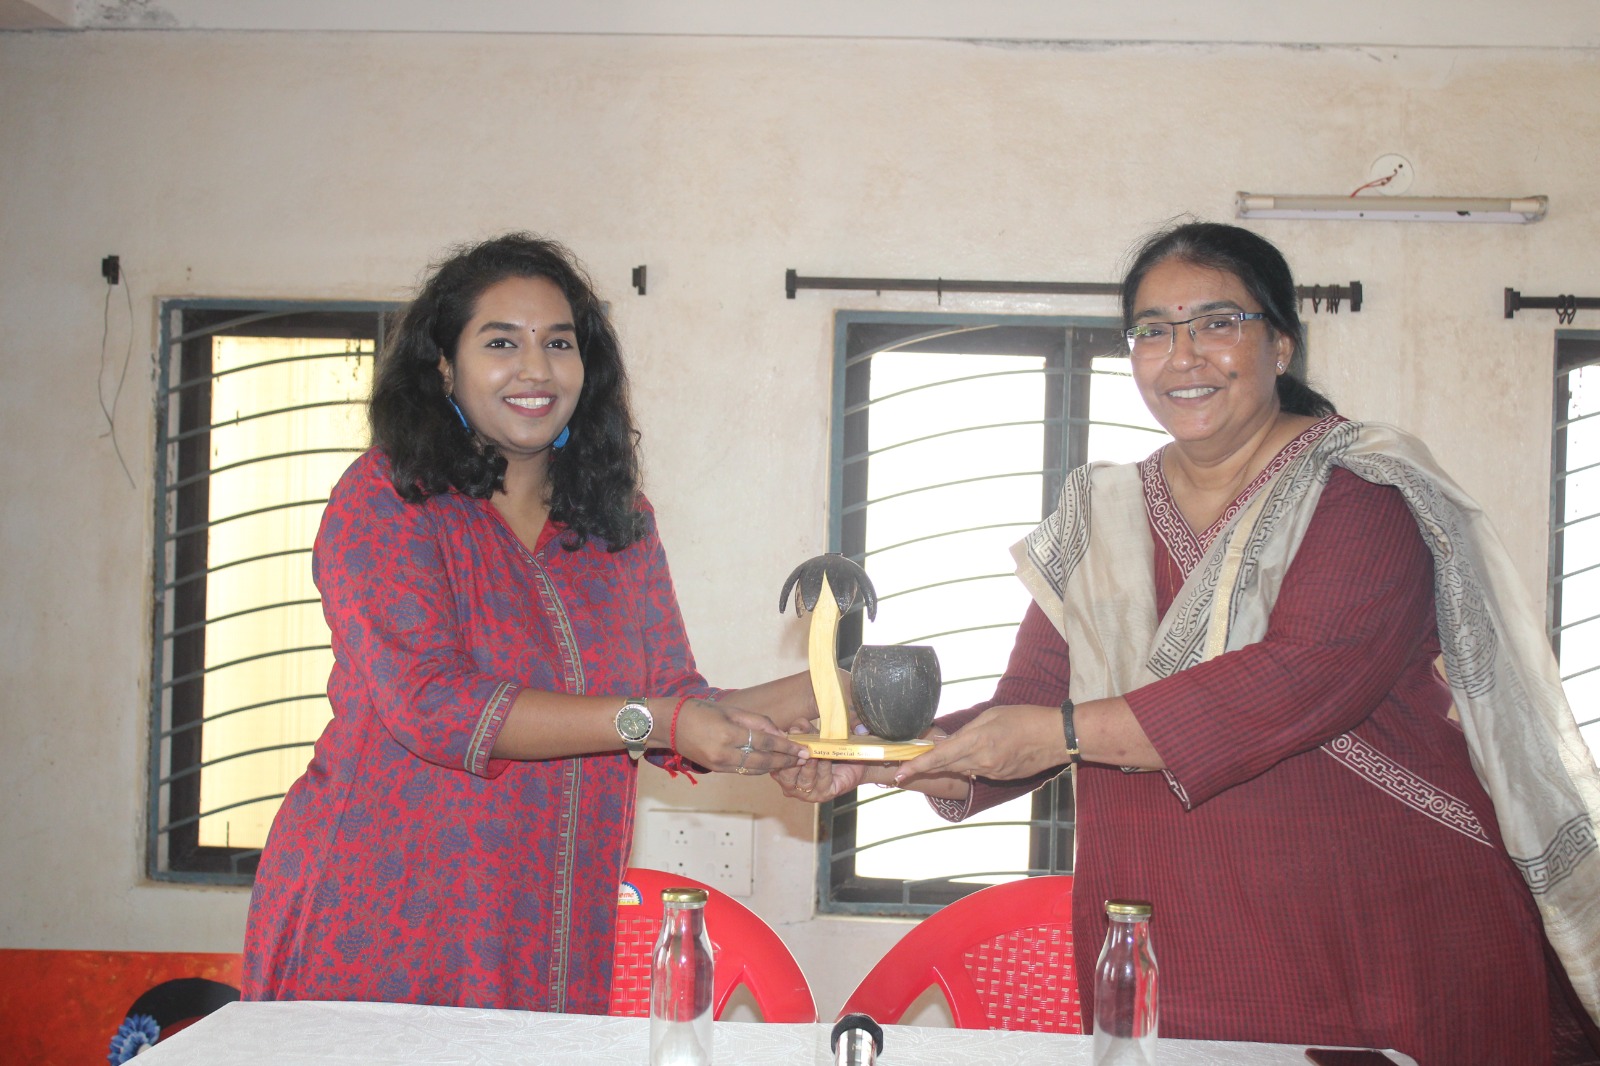 Ms. Suruthi Abirami is felicitated at the event.